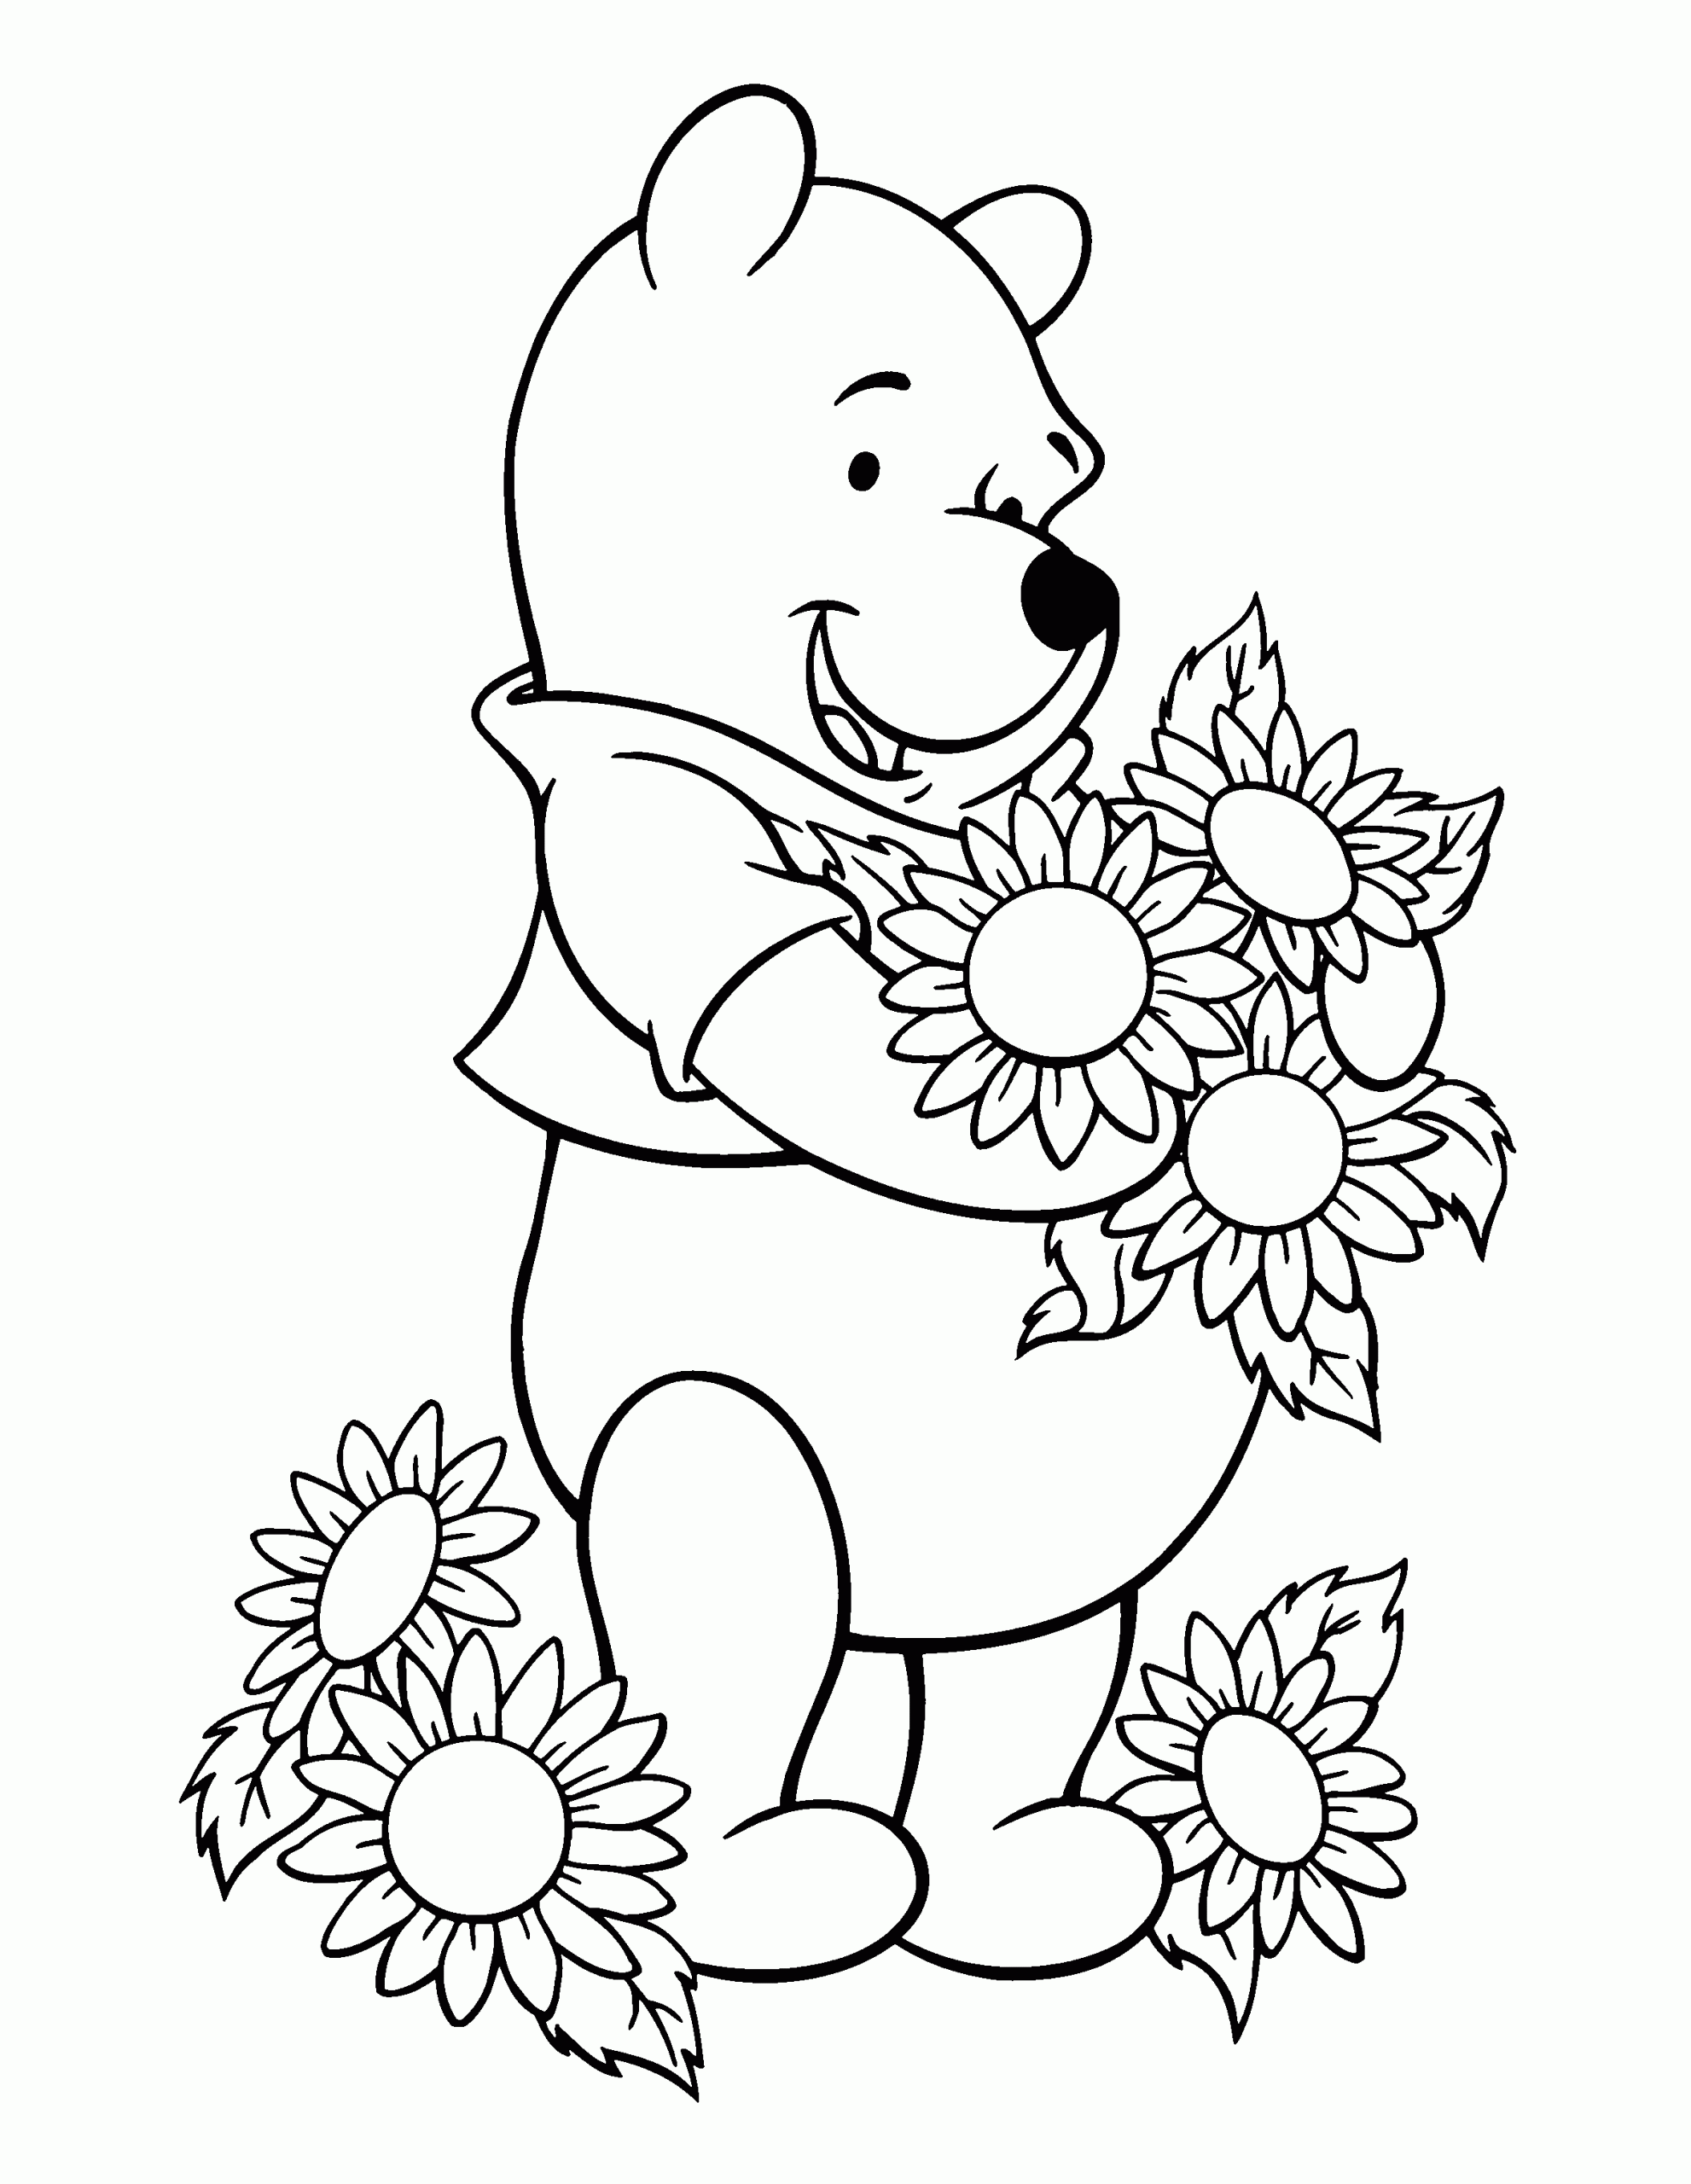 Baby Winnie The Pooh With flower